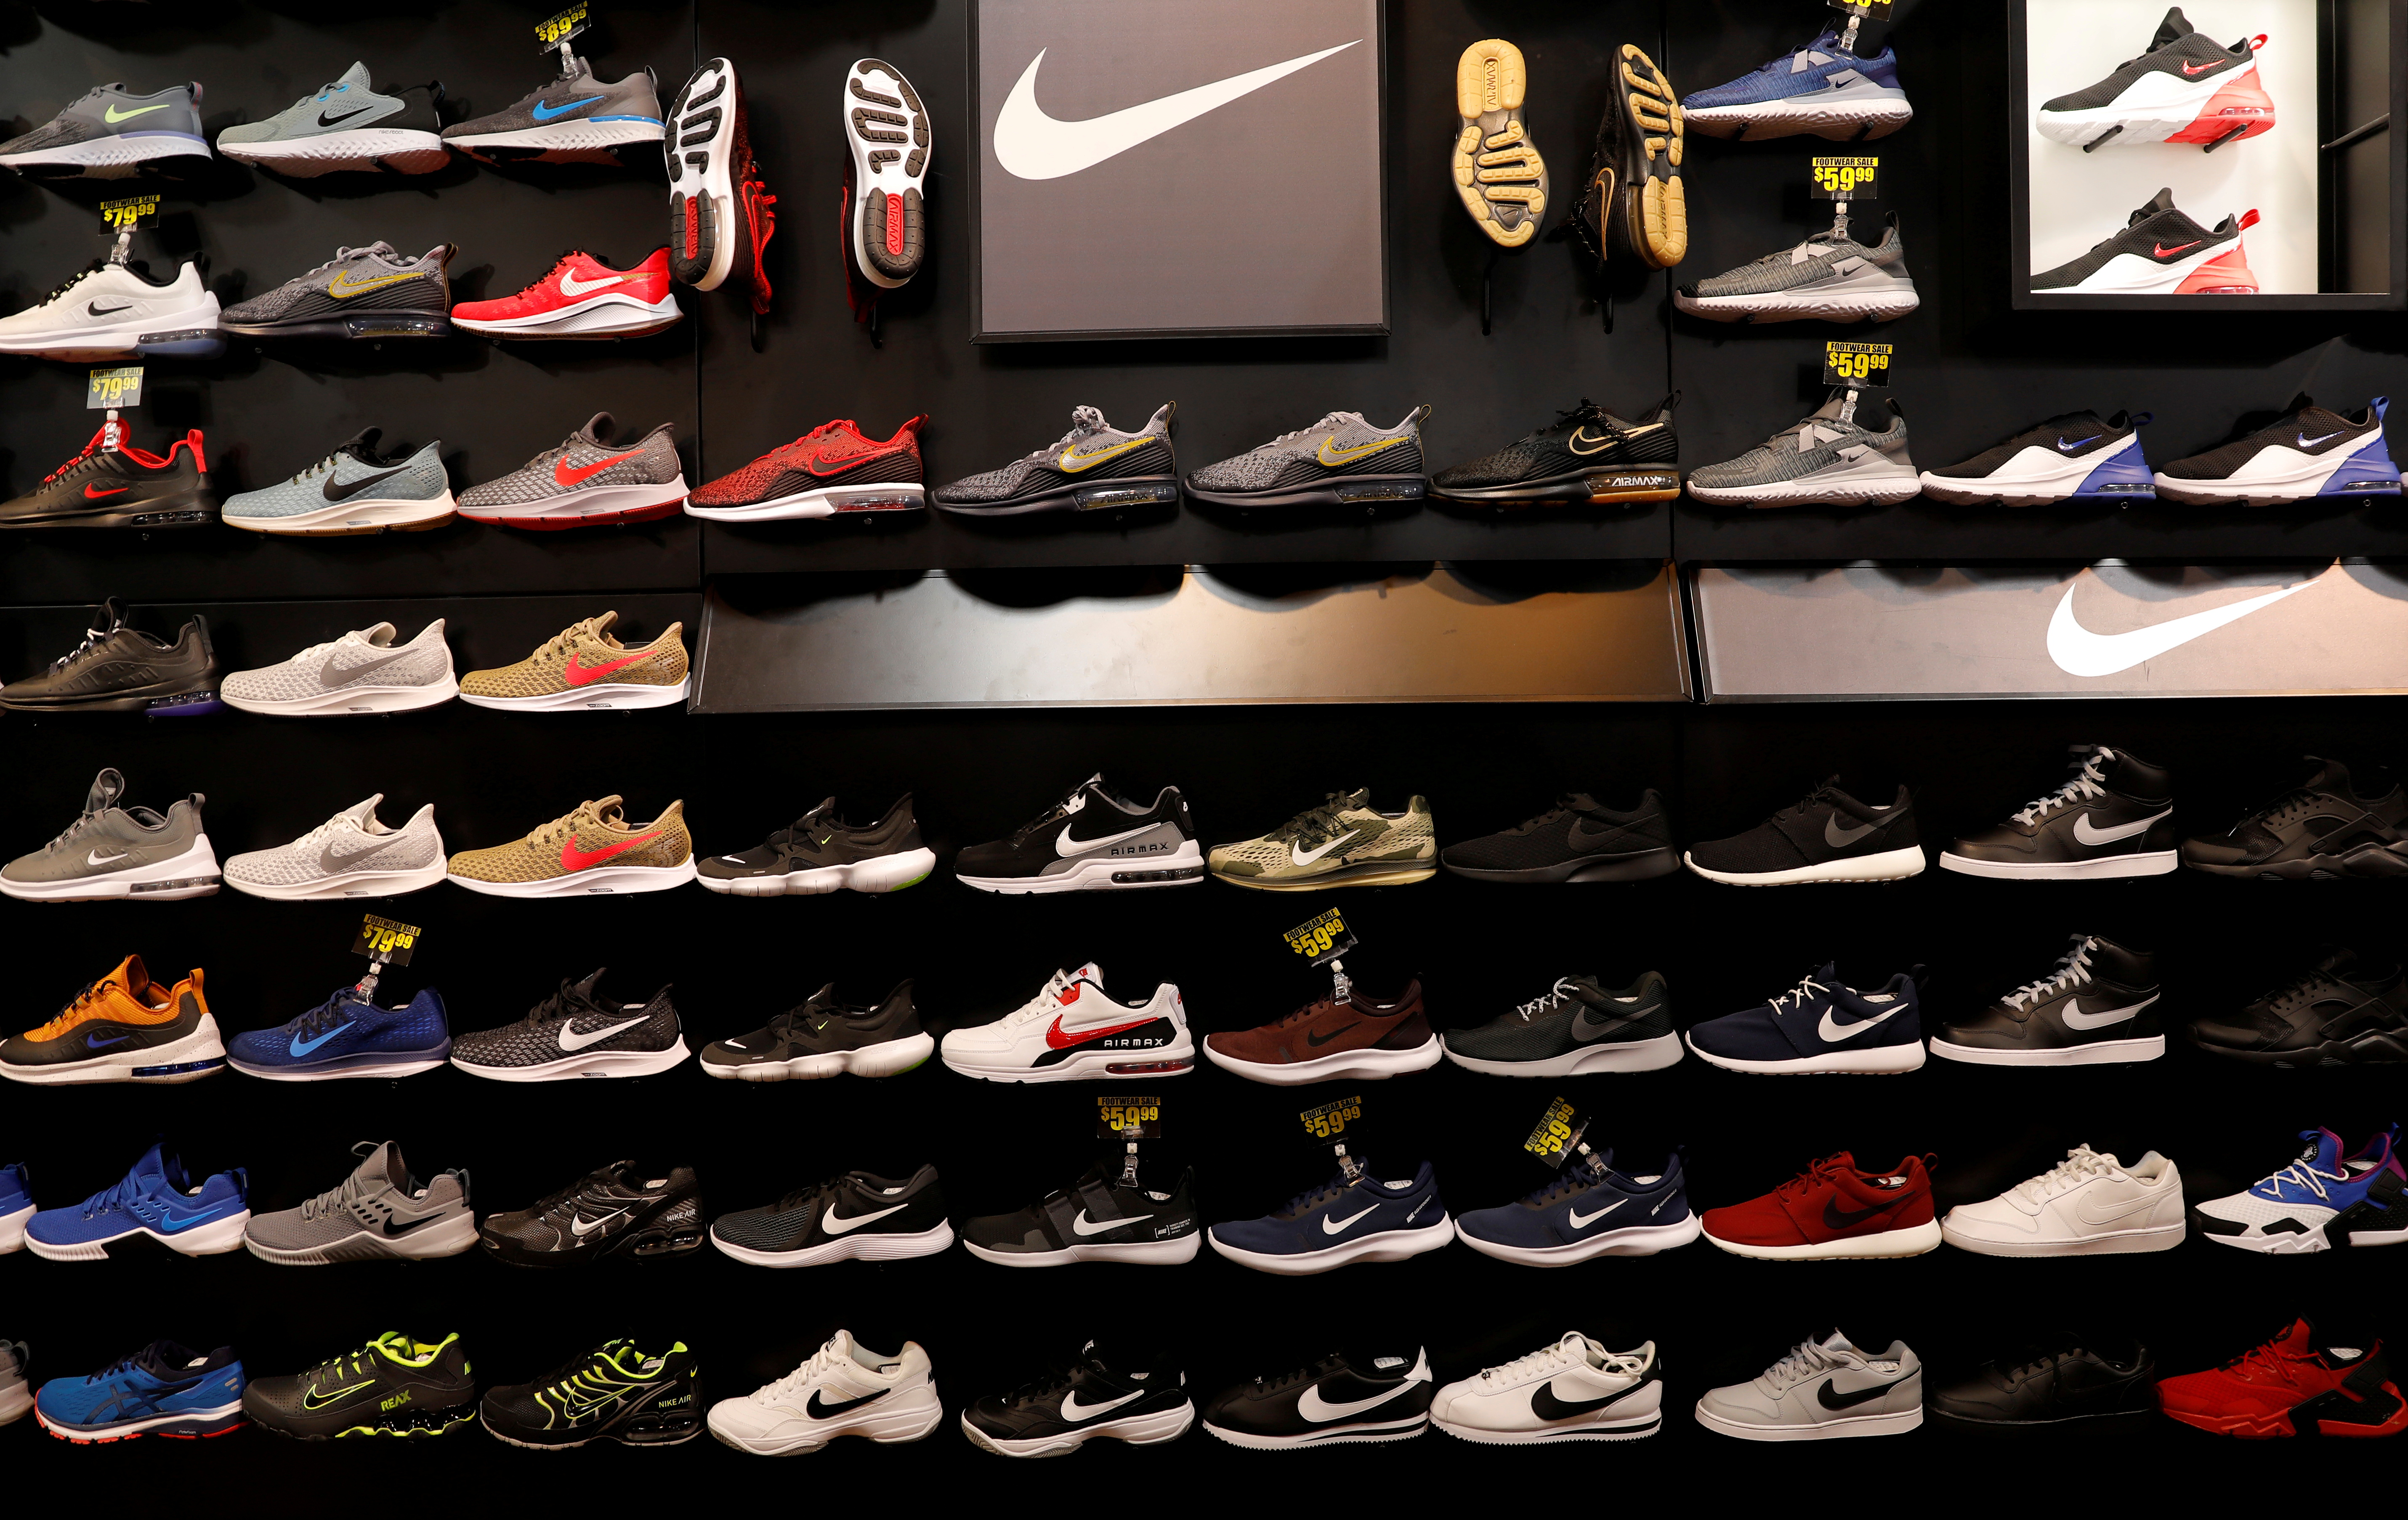 Nike shoes are seen displayed at a sporting goods store in New York